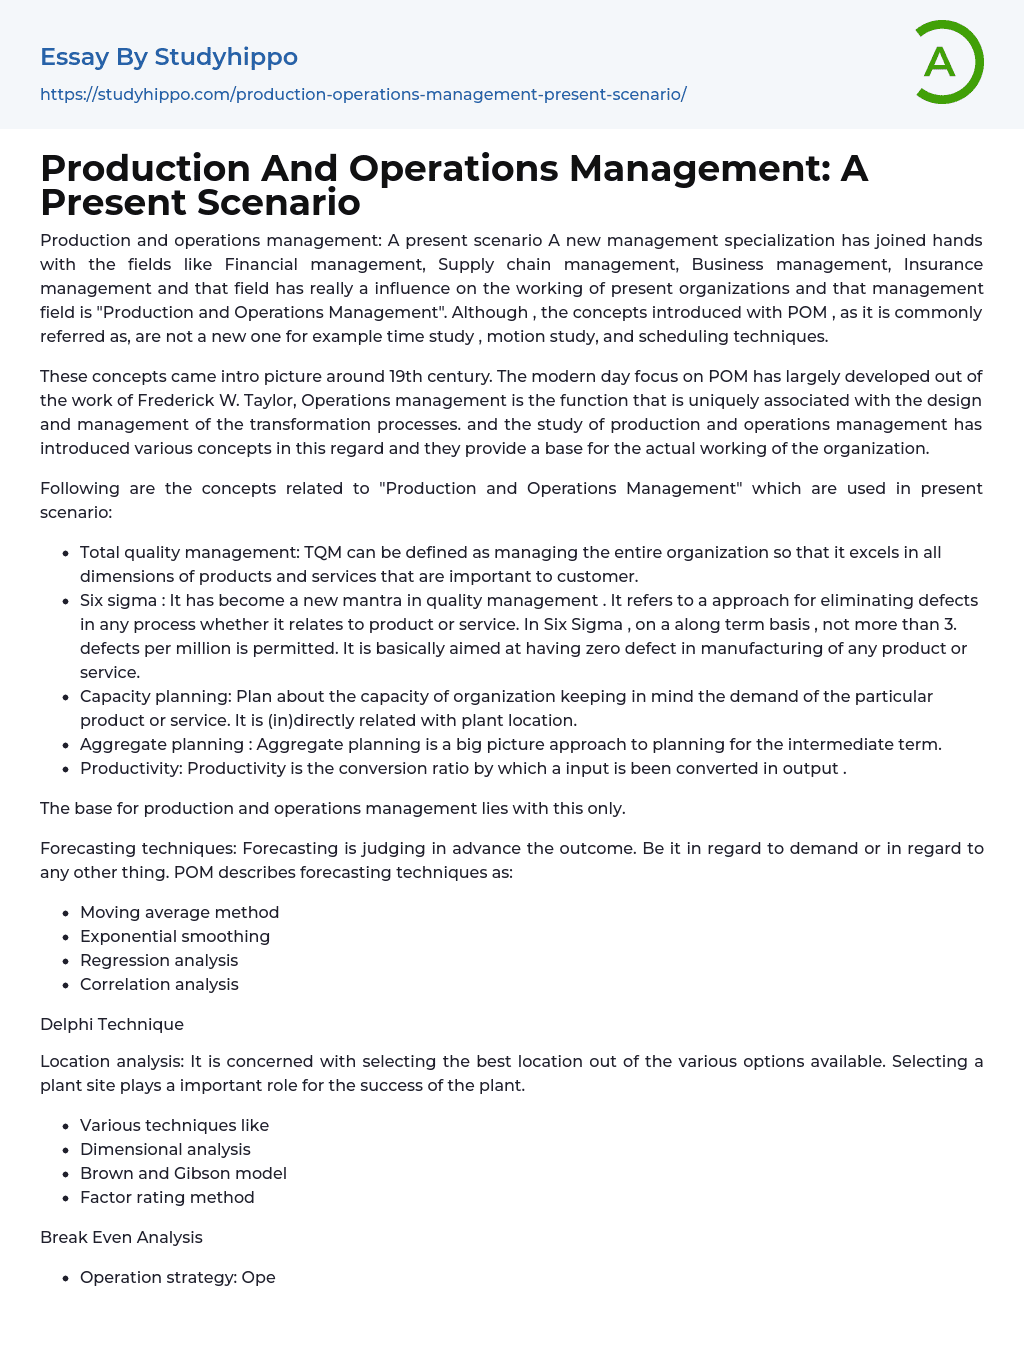 Production And Operations Management: A Present Scenario Essay Example